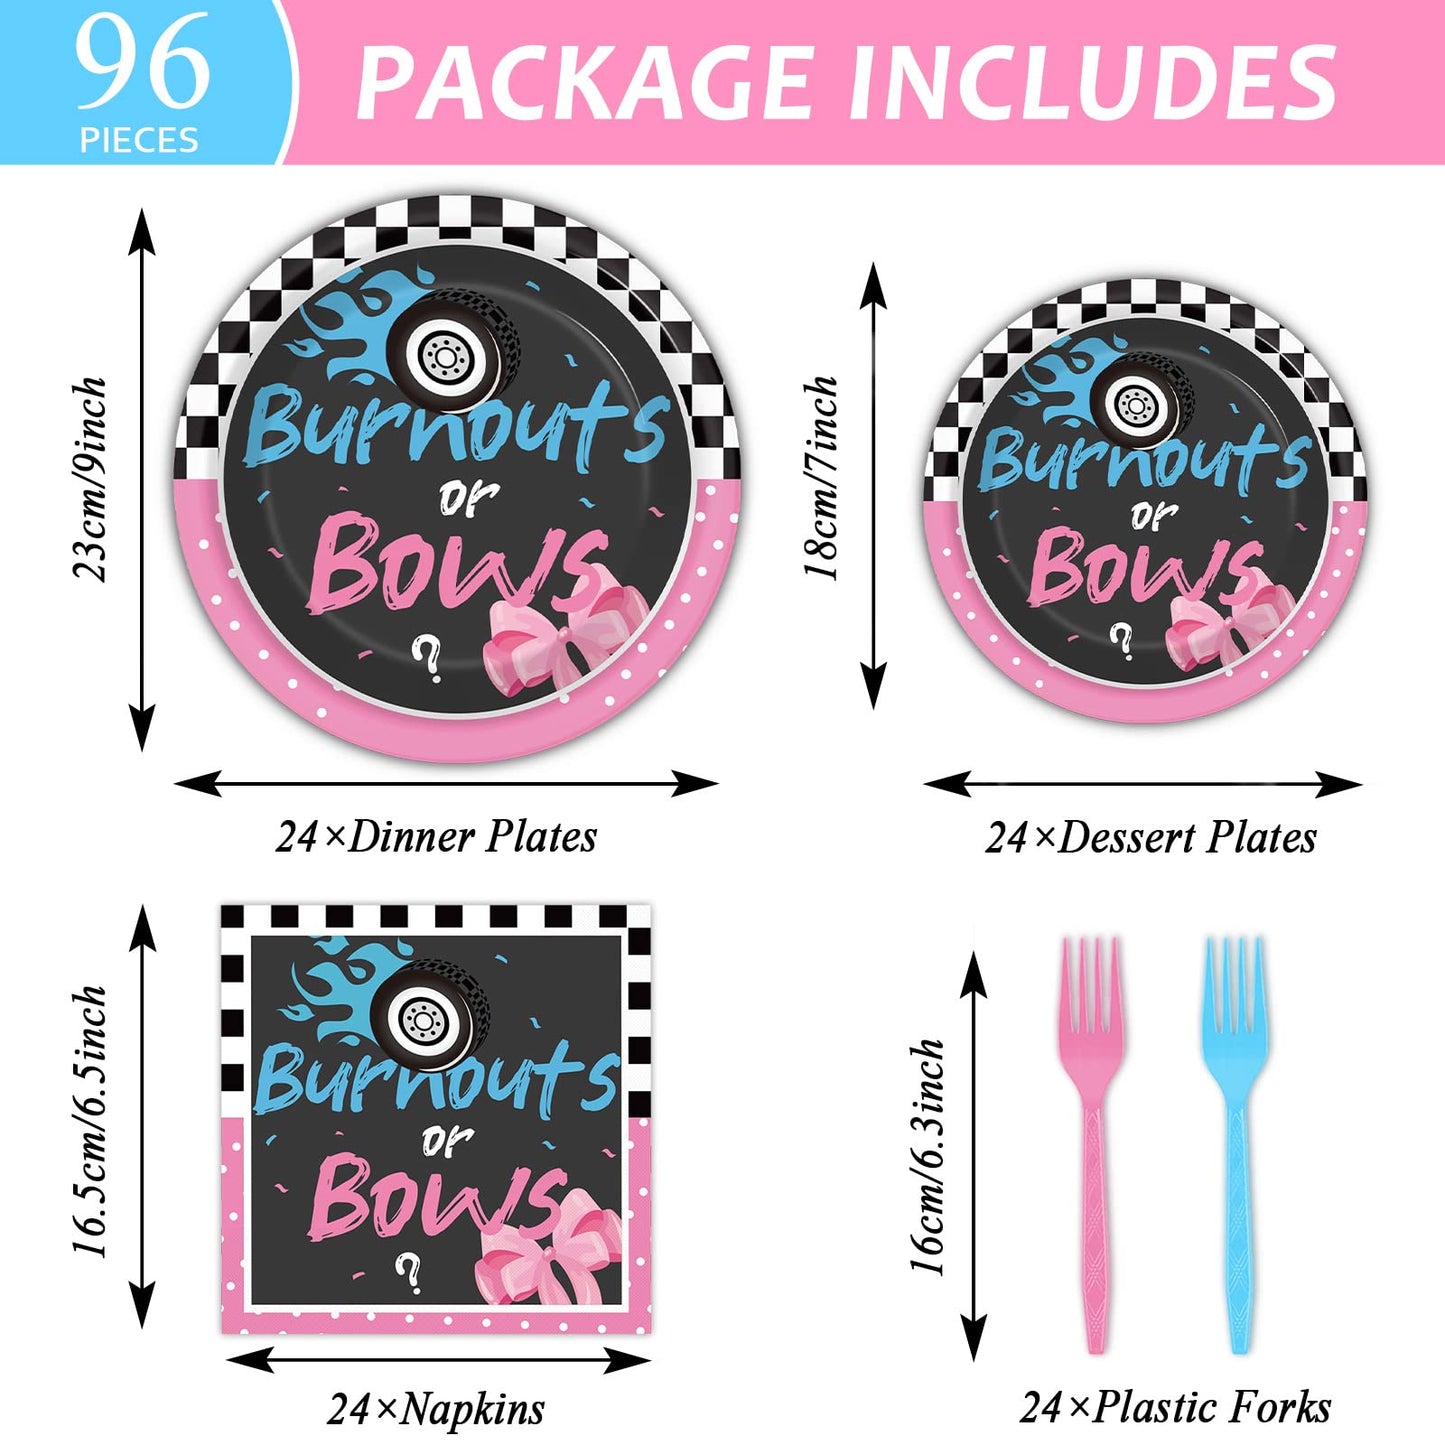 96 piece package contents